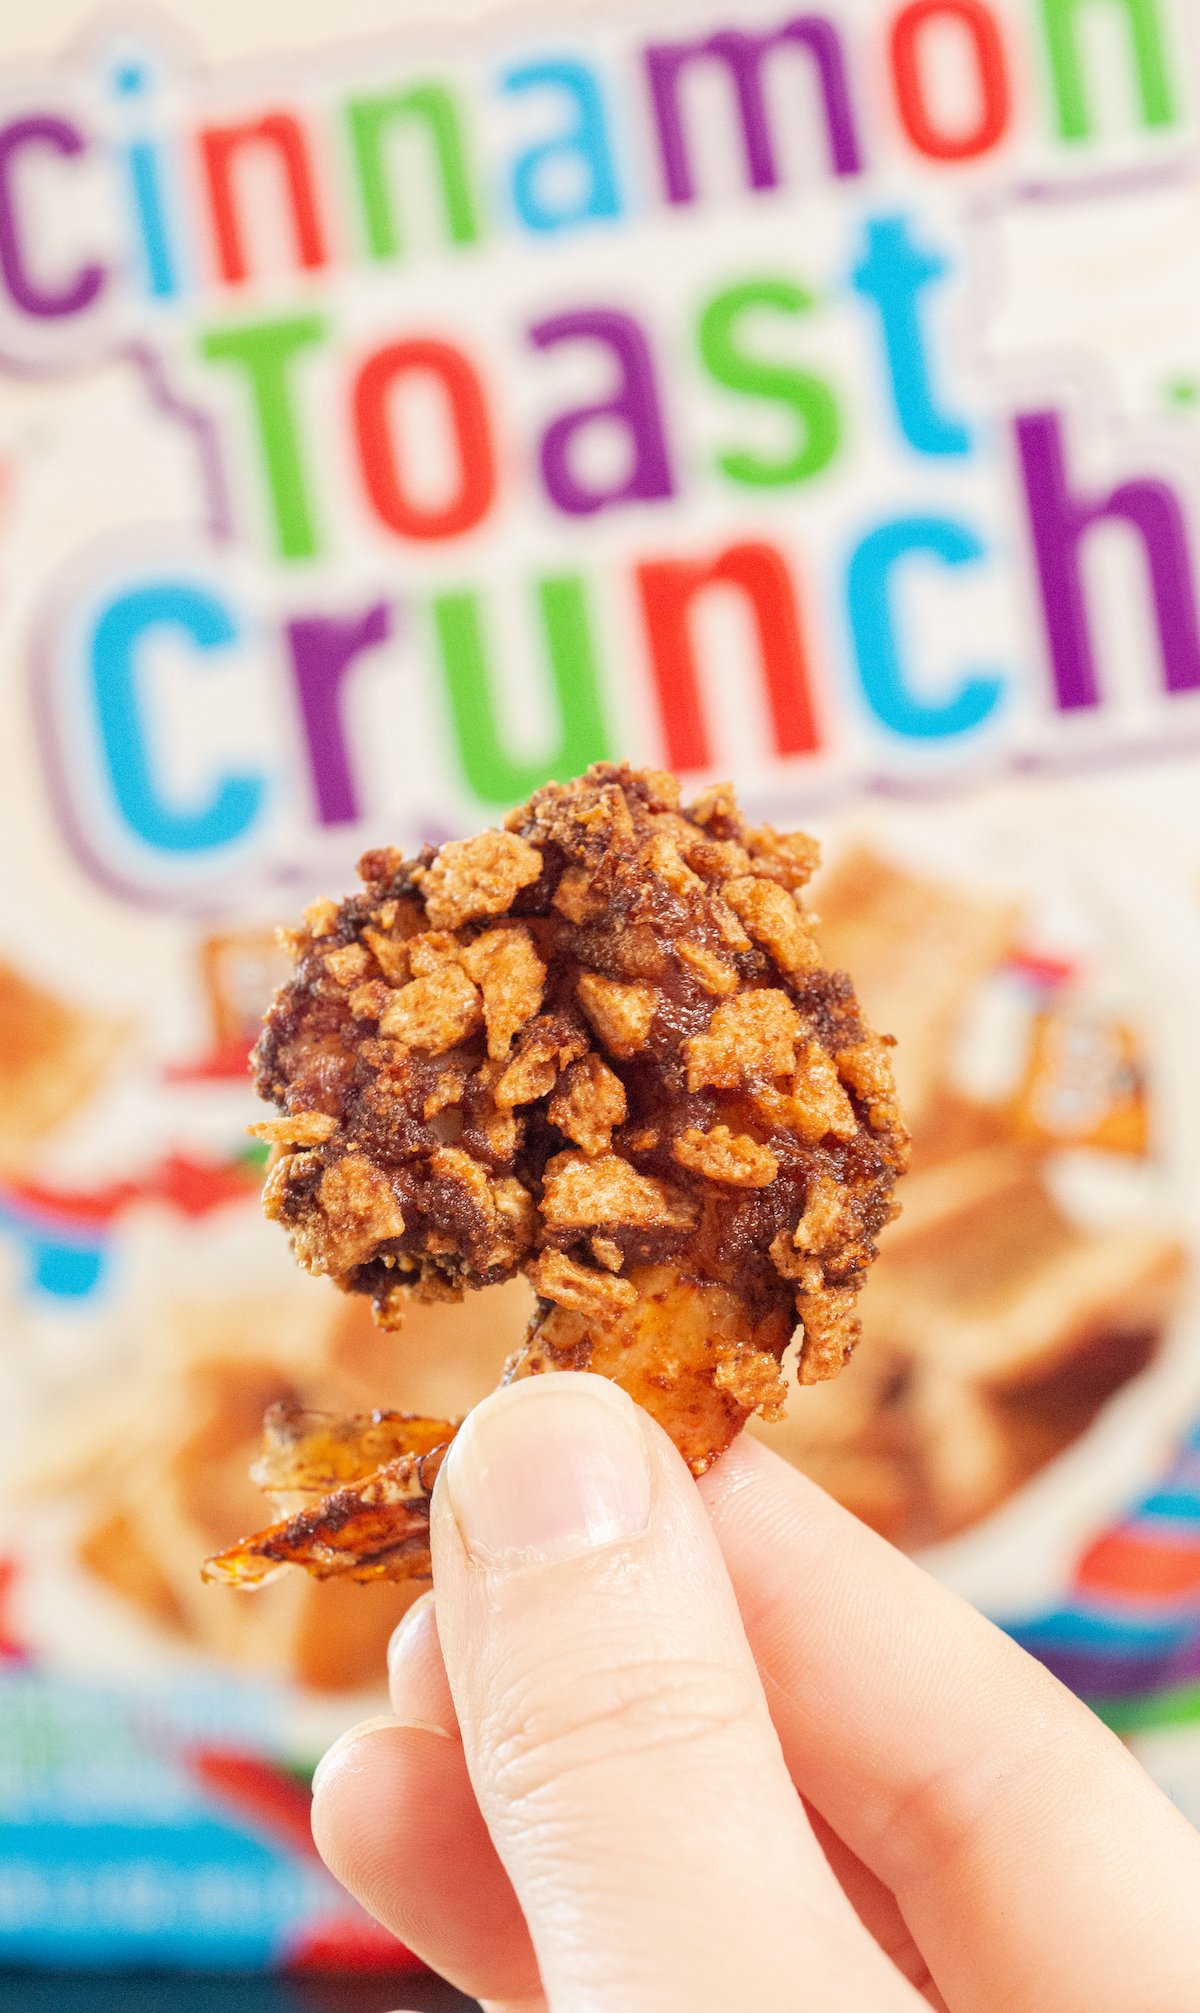 A finger holds up a piece of fried shrimp that's been breaded with cinnamon toast crunch in front of the cereal box.